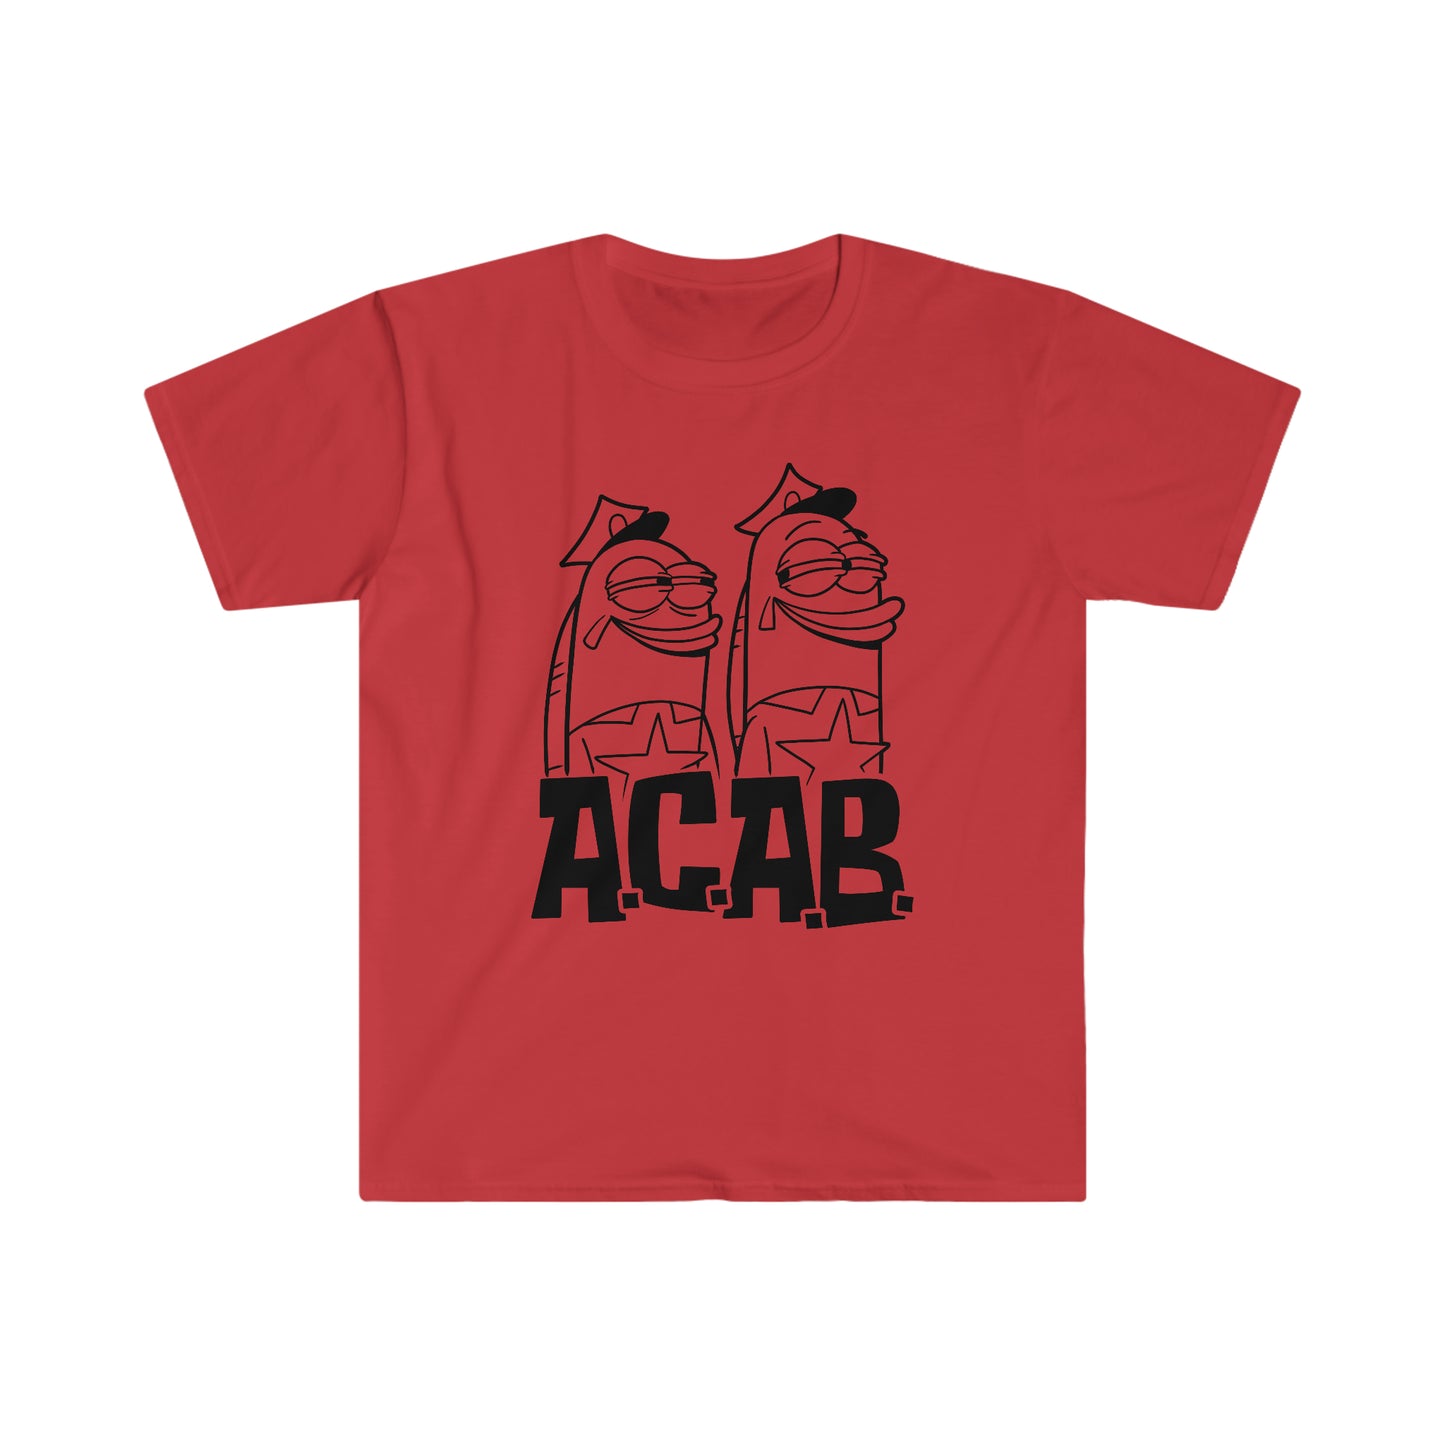 All Cops Are Barnacles t-shirt